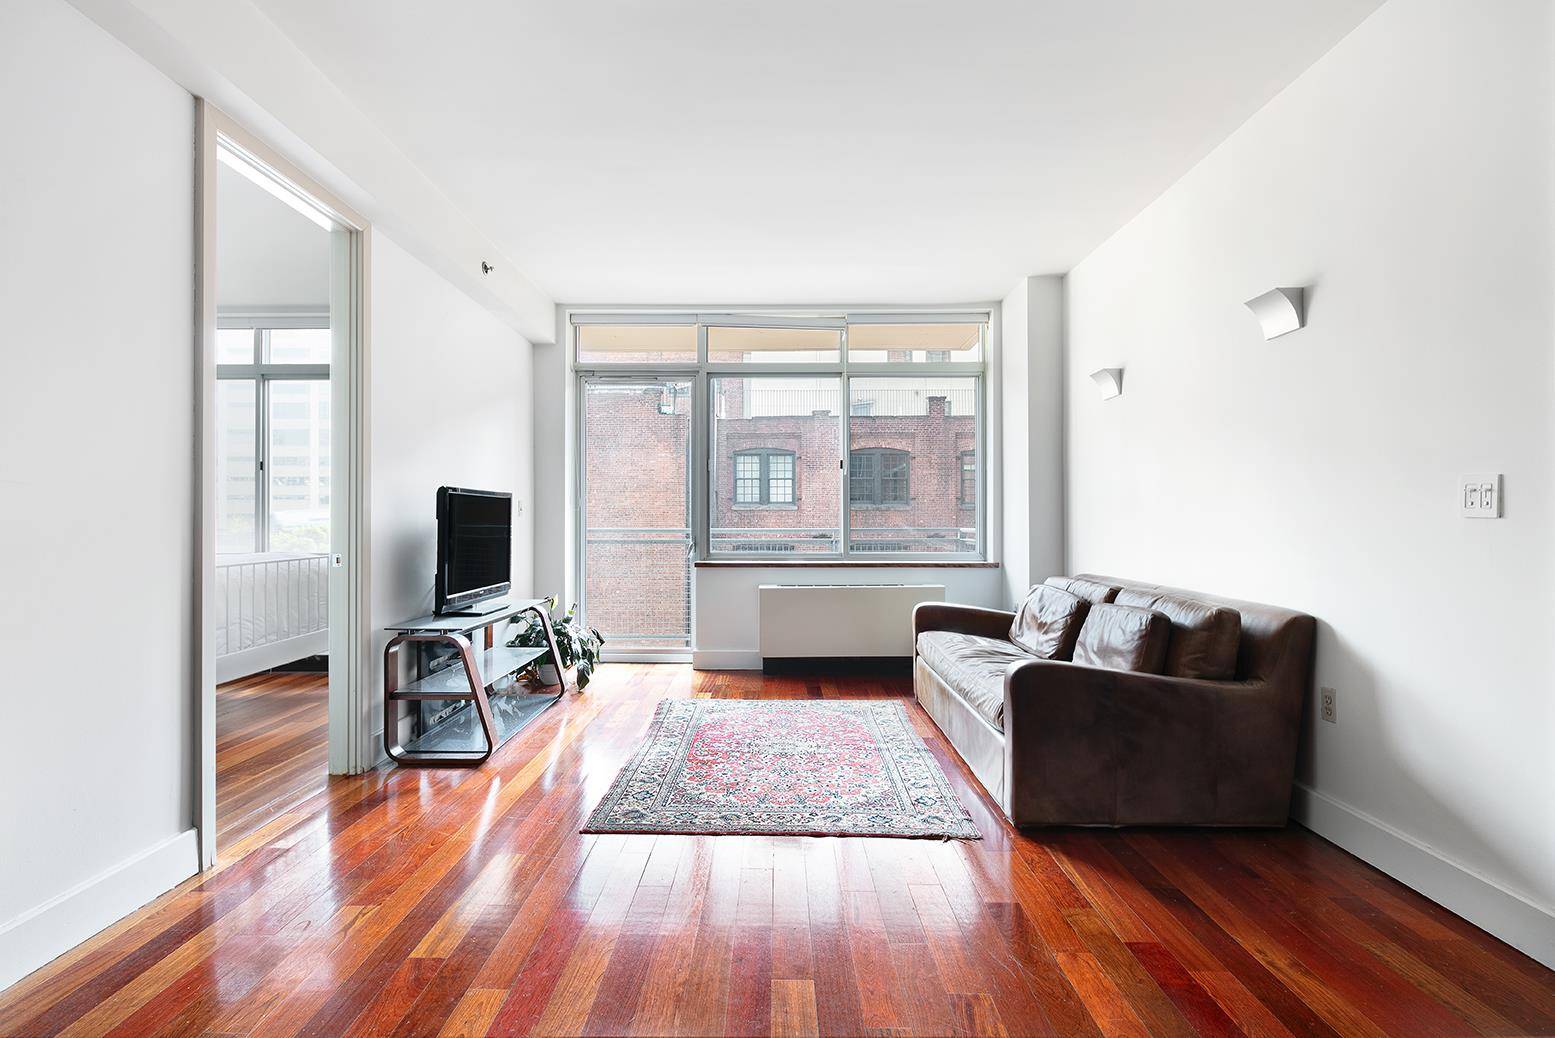 Located in the heart of Dumbo this two bedroom two full bathroom home with a private terrace has the ideal split bedroom layout.